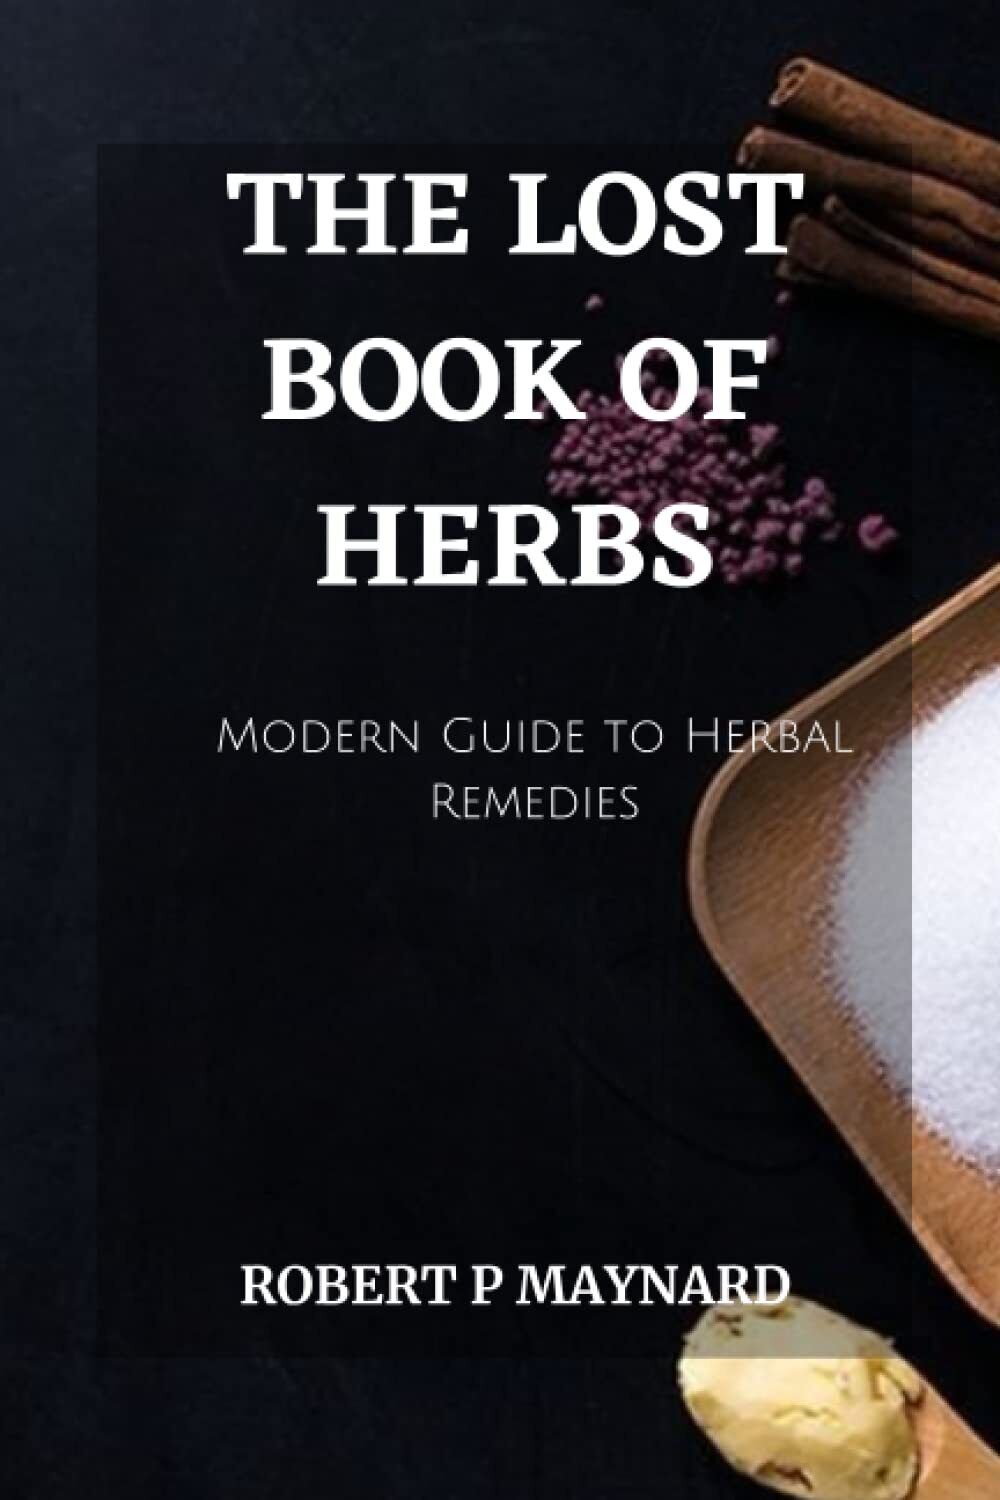 THE LOST BOOK OF HERBS: A Modern Guide to Herbal Remedies (Maynard's Evergreen